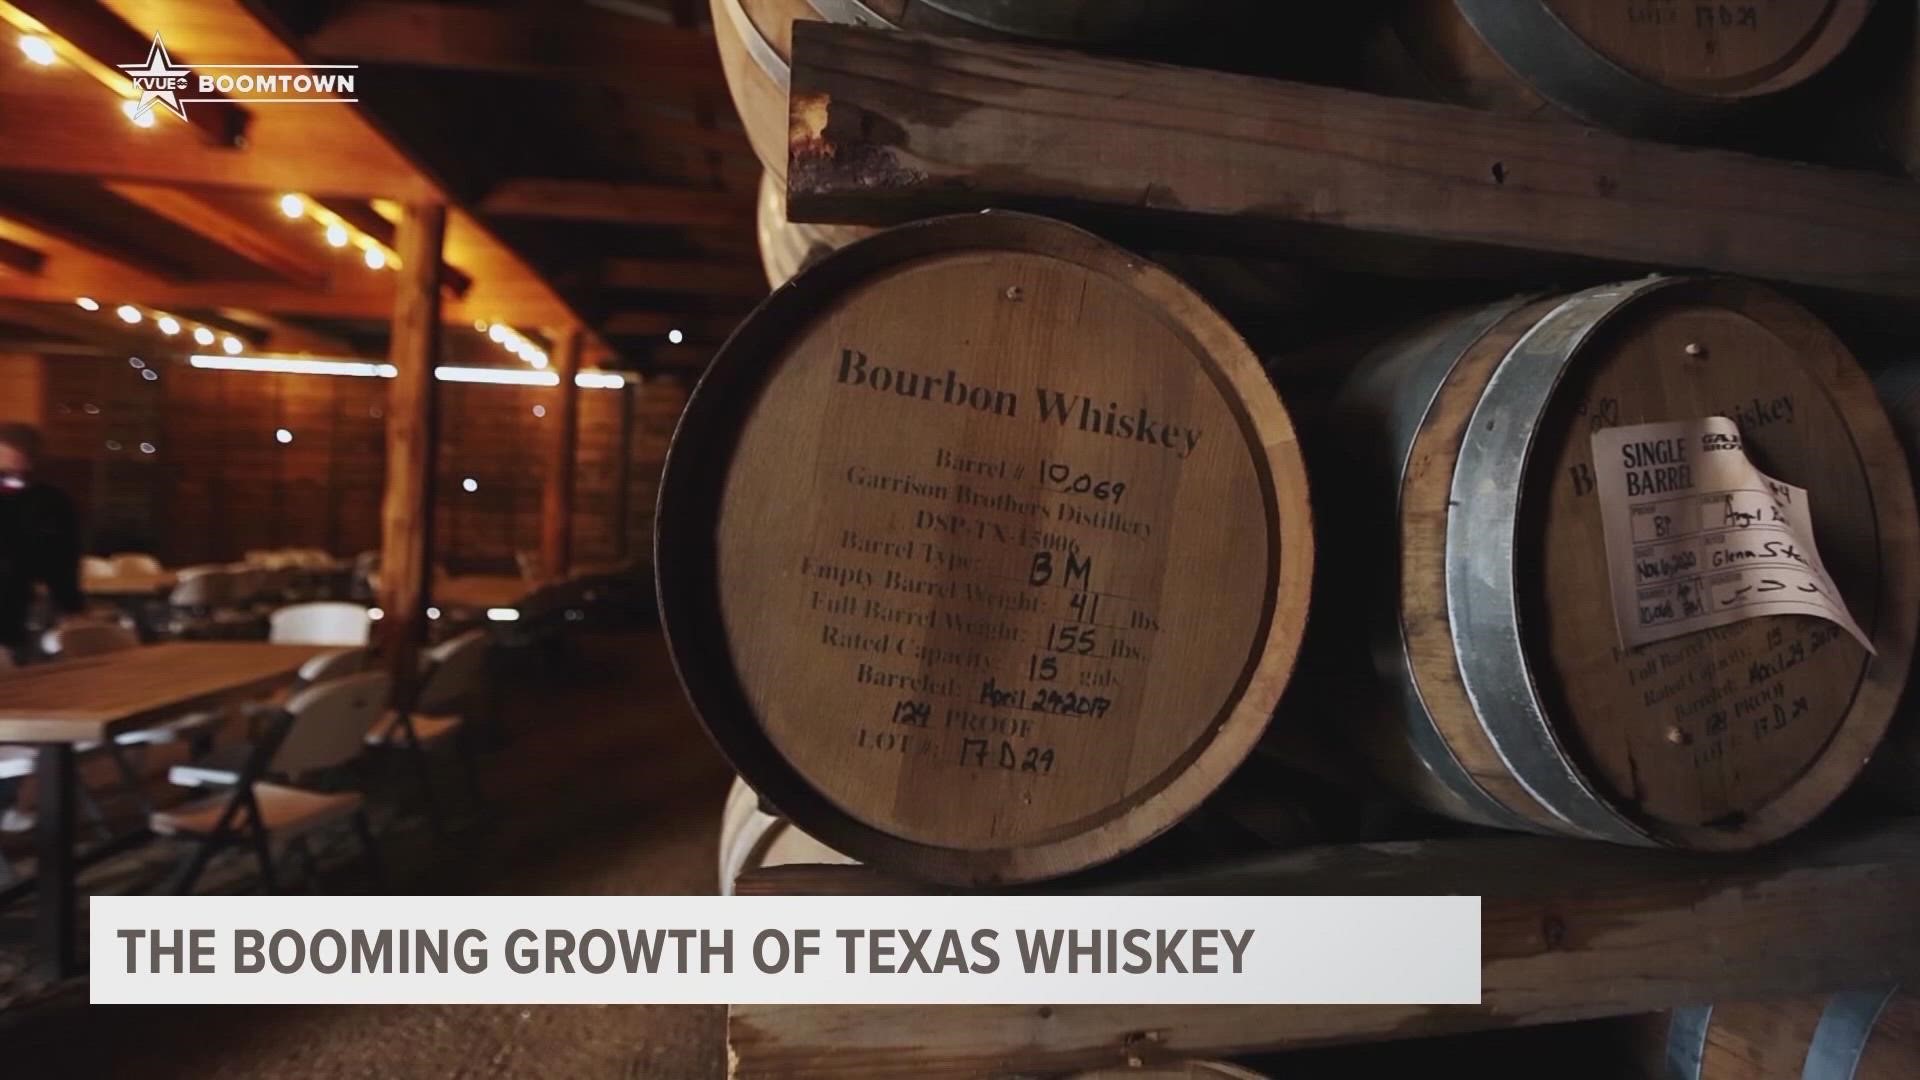 Central Texas has seen a boom in whisky distilleries, breweries and wineries in the past decade. We explore what makes the region so unique.